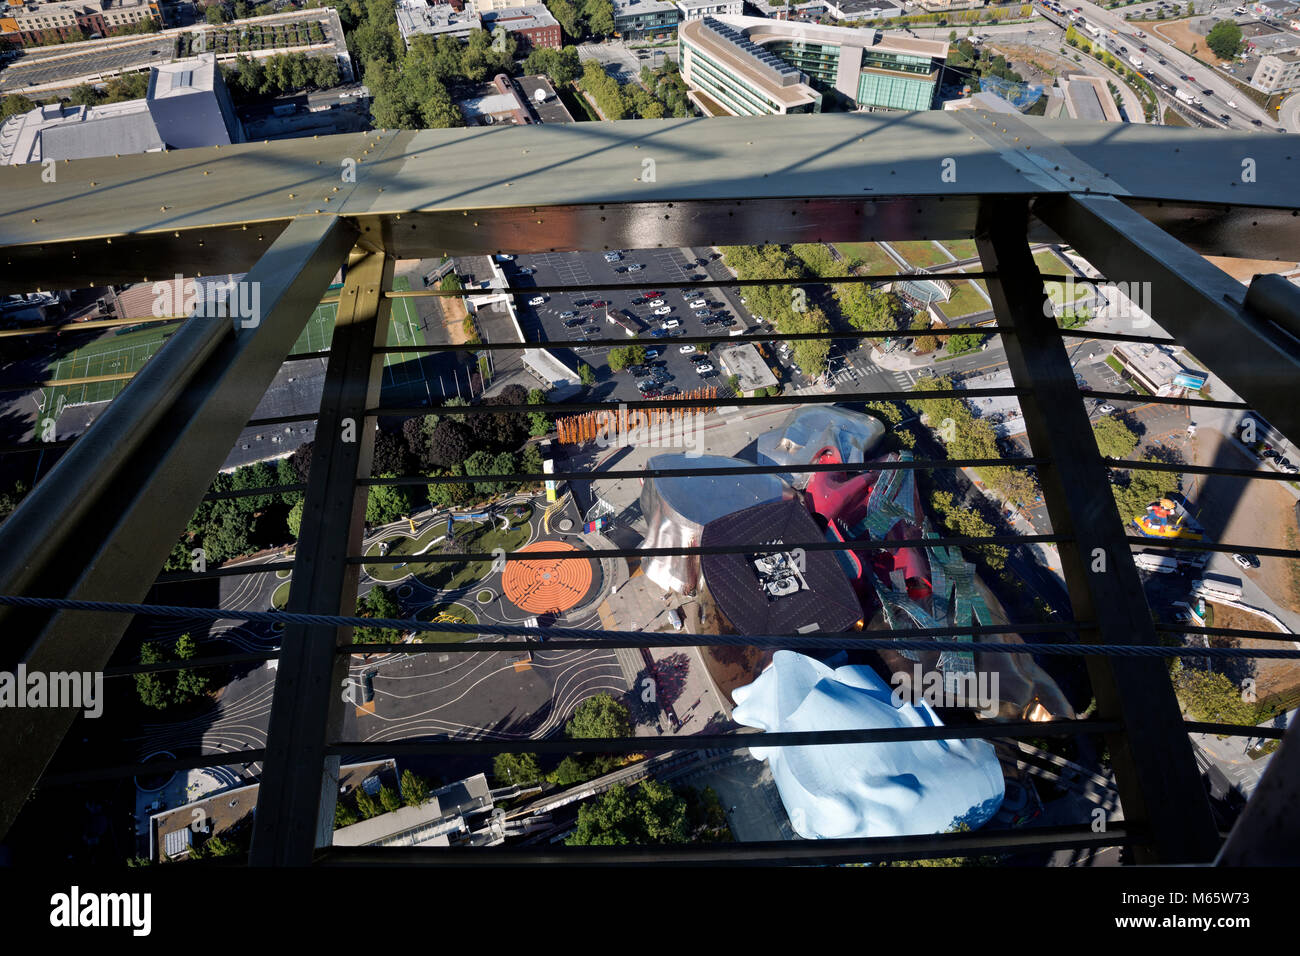 WA13798-00...WASHINGTON - View over the Seattle Center featuring the Museum of Pop Culture, the monorail and the children's play area. 2017 Stock Photo